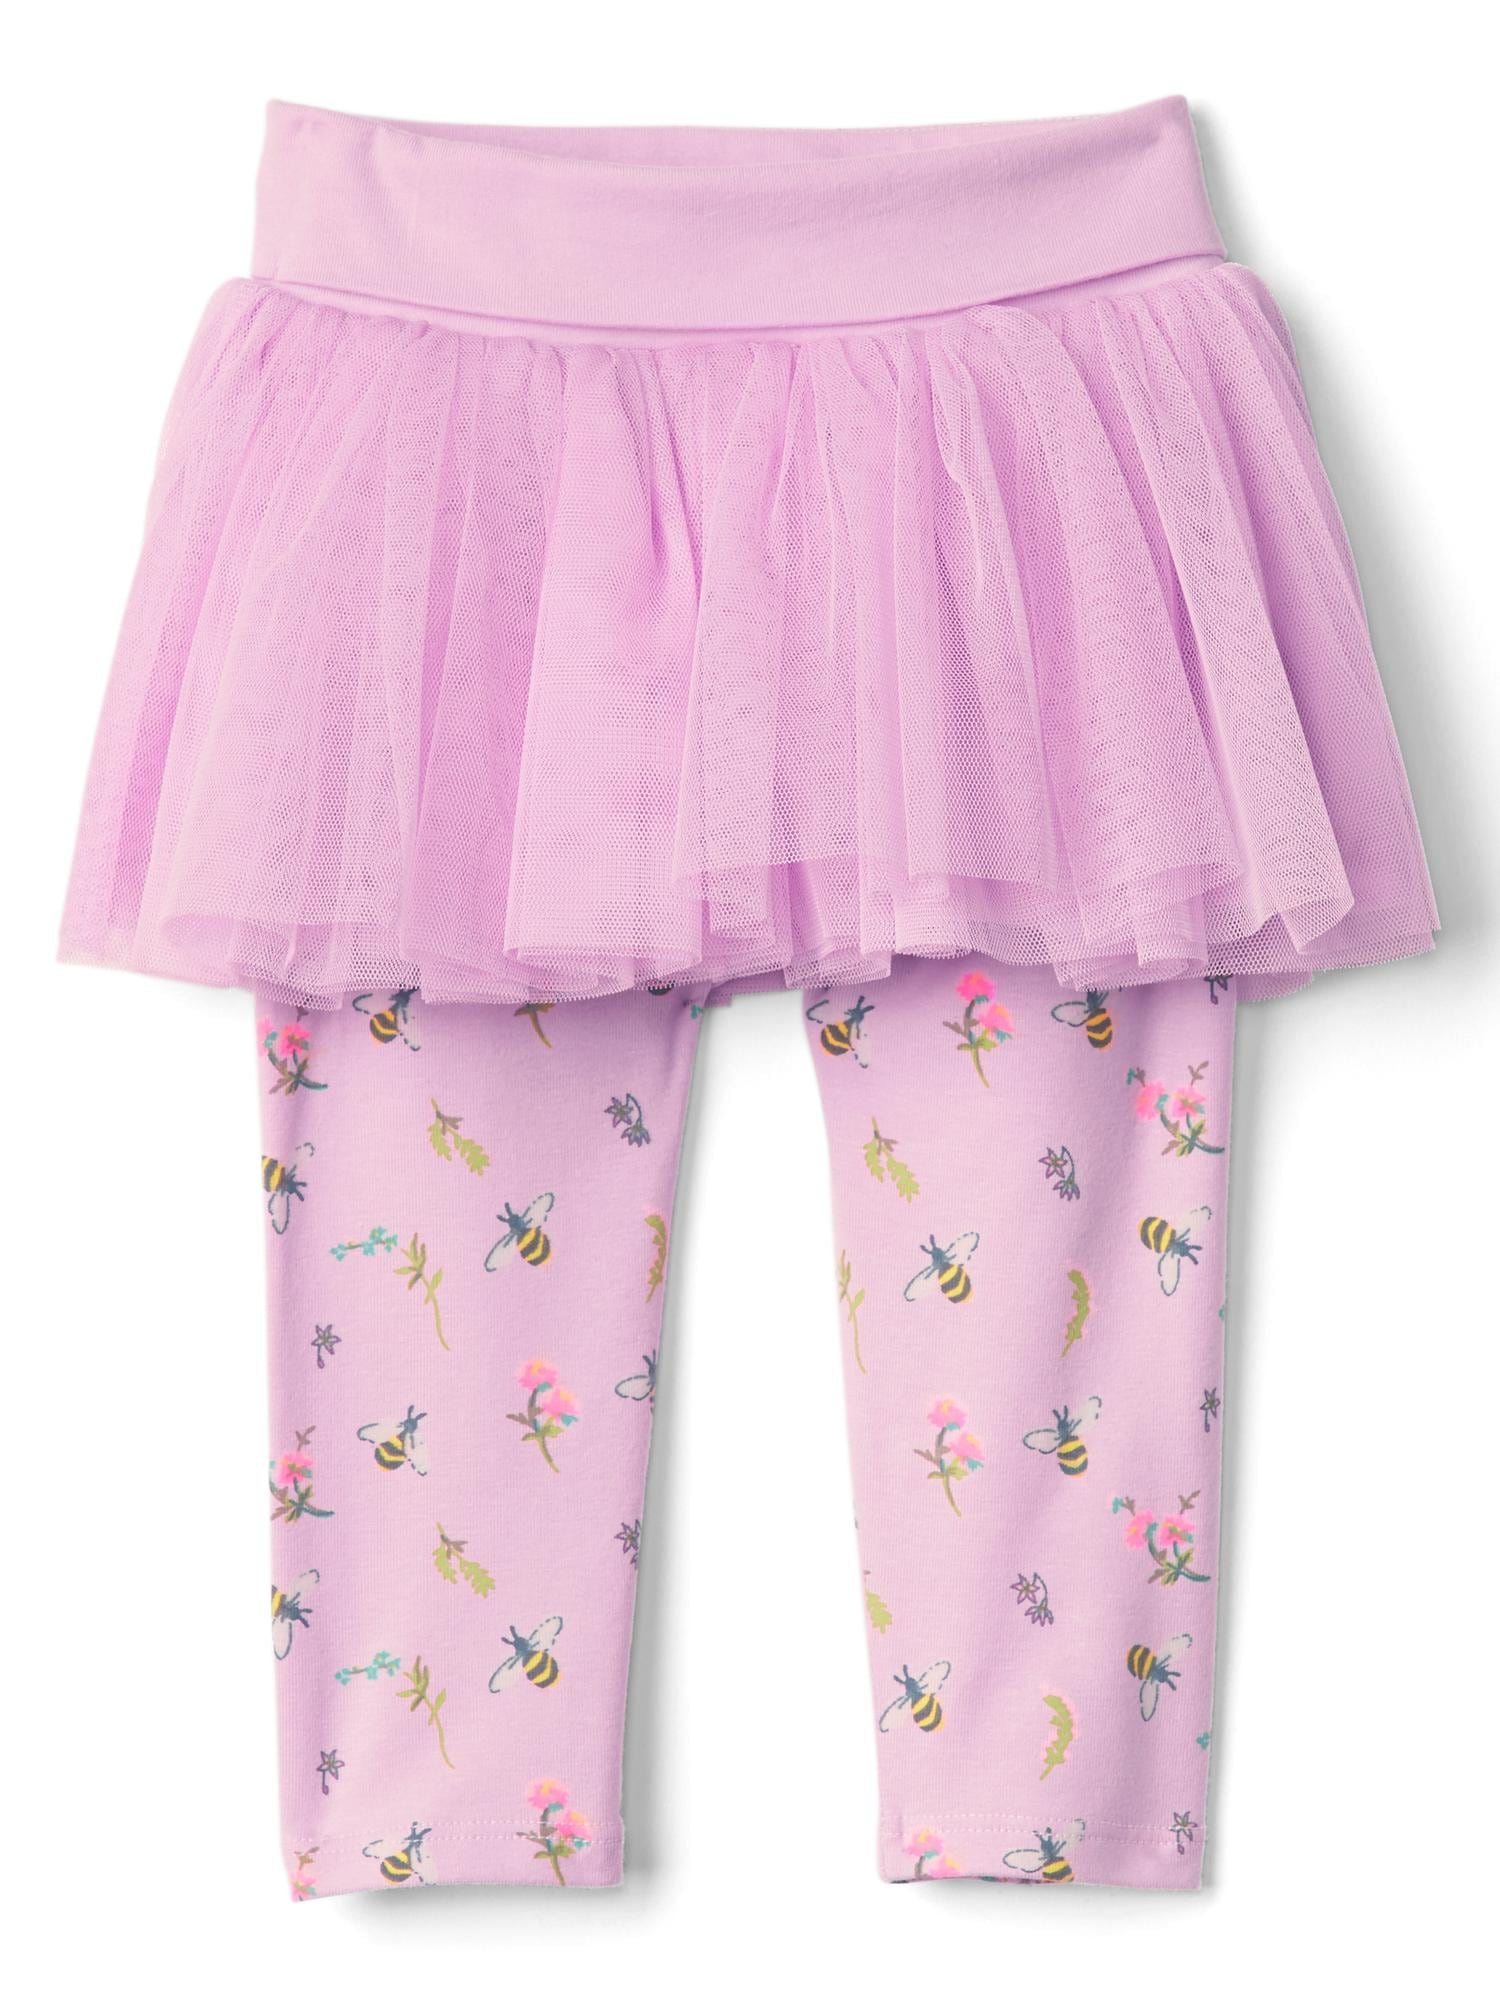 Buy skirt with leggings at Best Price, Online Baby and Kids